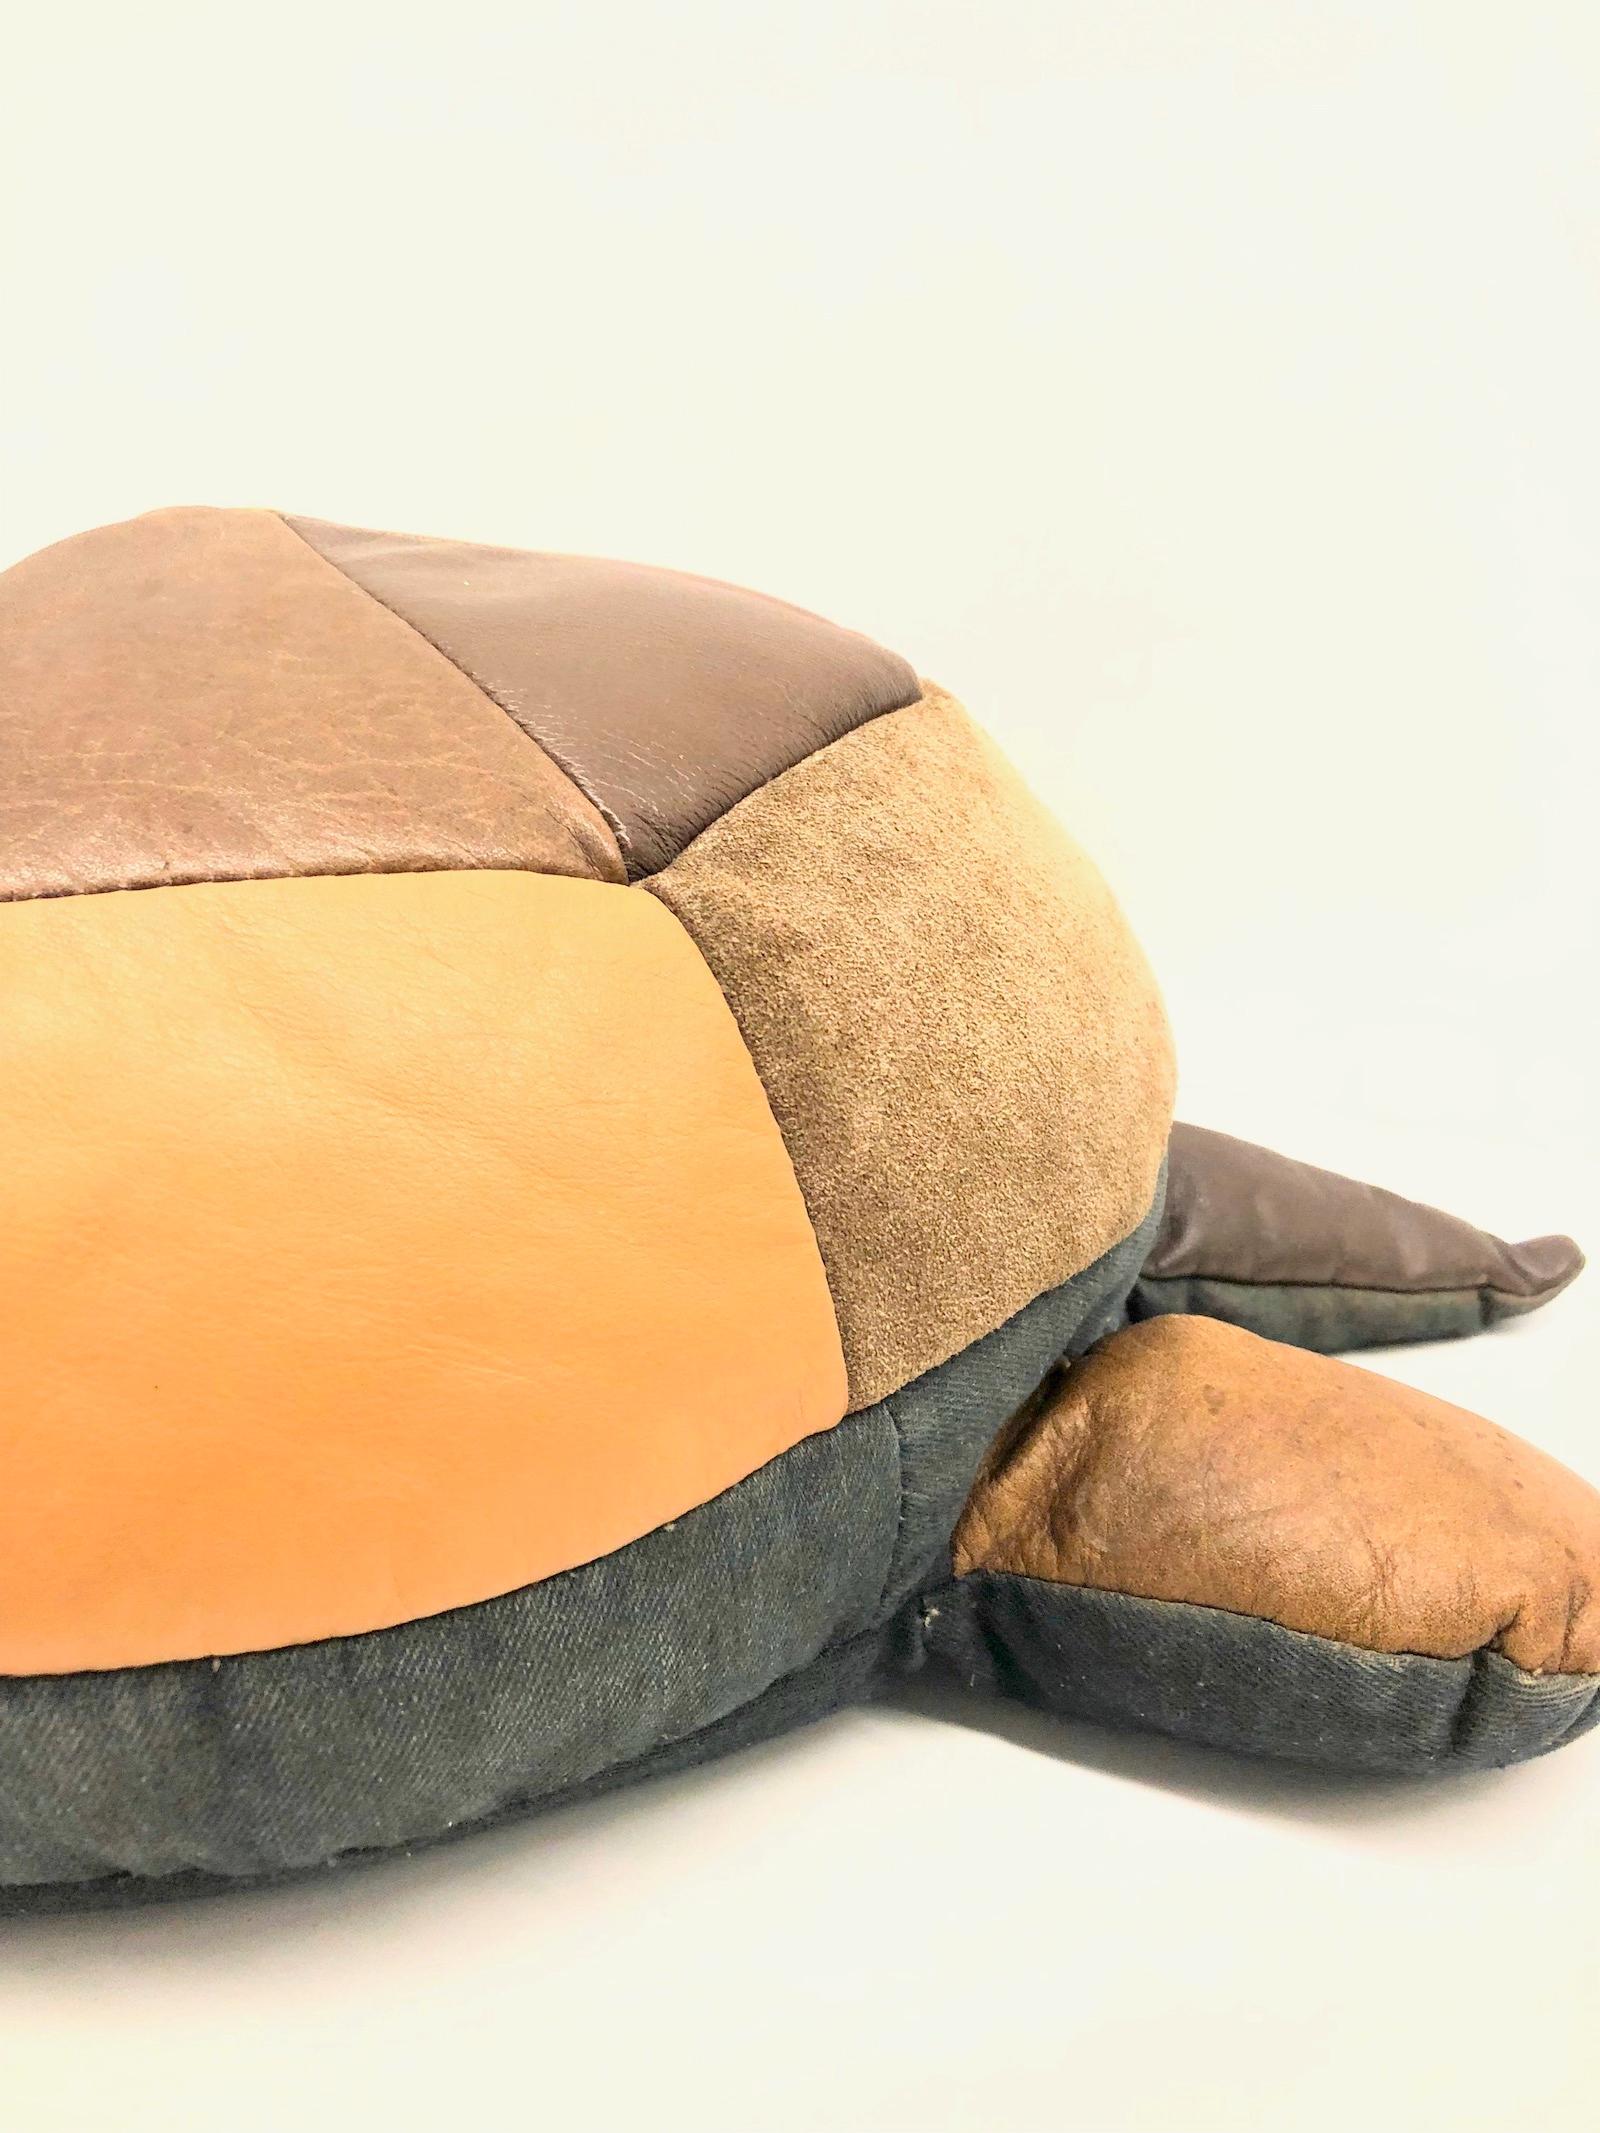 German Turtle Animal Pouf Ottoman Footstool Poof Pouffe Mad of Leather, 1970s